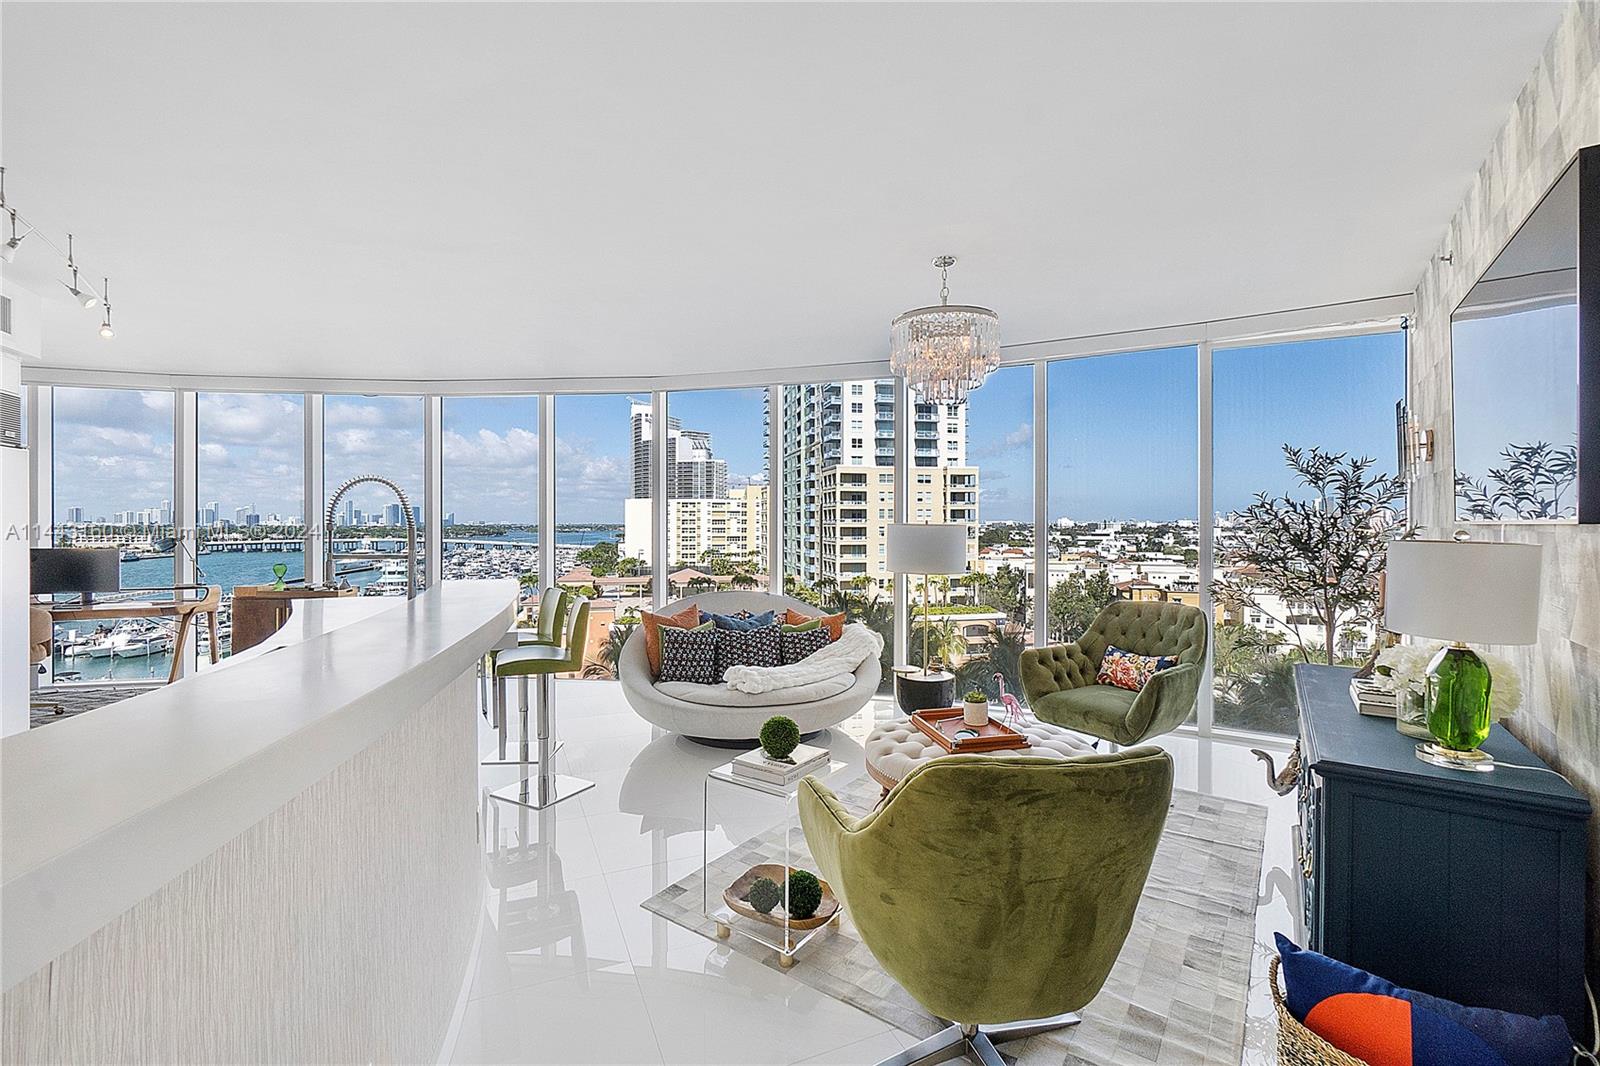 Experience one-of-a-kind indulgence in this rare corner unit showcasing dramatic views of Biscayne Bay, Fisher Island, South Beach, and the glittering Miami cityscape. The sleek interior radiates modern elegance with custom details like built-ins and a chef's kitchen appointed with premium appliances. Entertain effortlessly on the sprawling 14-foot-deep balcony, directly accessible from the light-filled living room. Retreat to the spa-like main bathroom off the iconic primary bedroom. The two spacious terraces overlook both city and sea. Enjoy exclusive amenities like a private beach club. Beyond your private oasis, some of the world's best dining, beaches and marinas are just minutes away. This is luxury, convenience, and beauty combined in a truly matchless way.